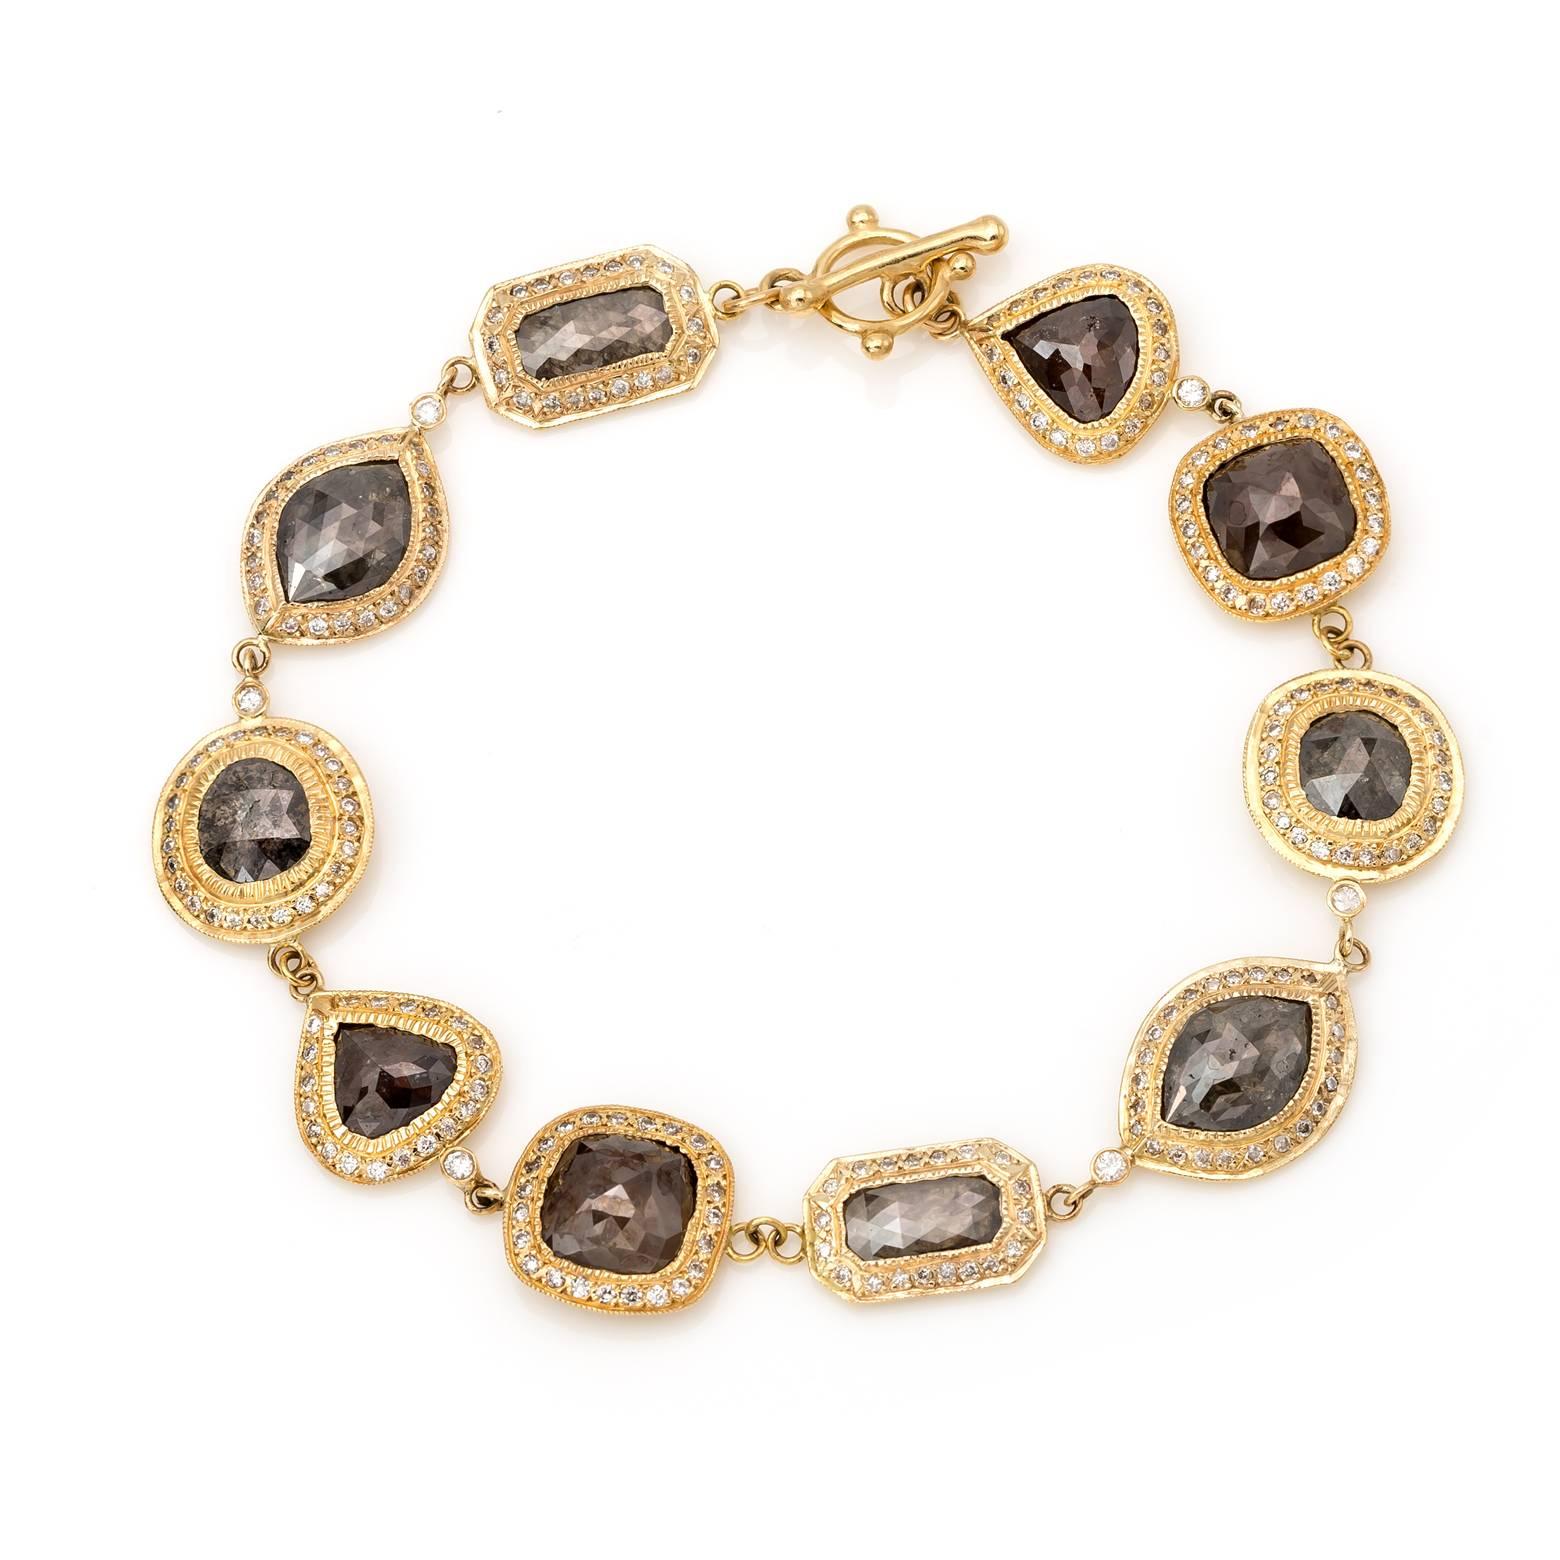 Champagne and brown diamonds surrounded with a white diamond bezel in 10 gorgeous links set in 14K Yellow gold. Each diamond could be a center piece in itself as this bracelet showcases 5 different shapes from marquise, circle, square, drop and